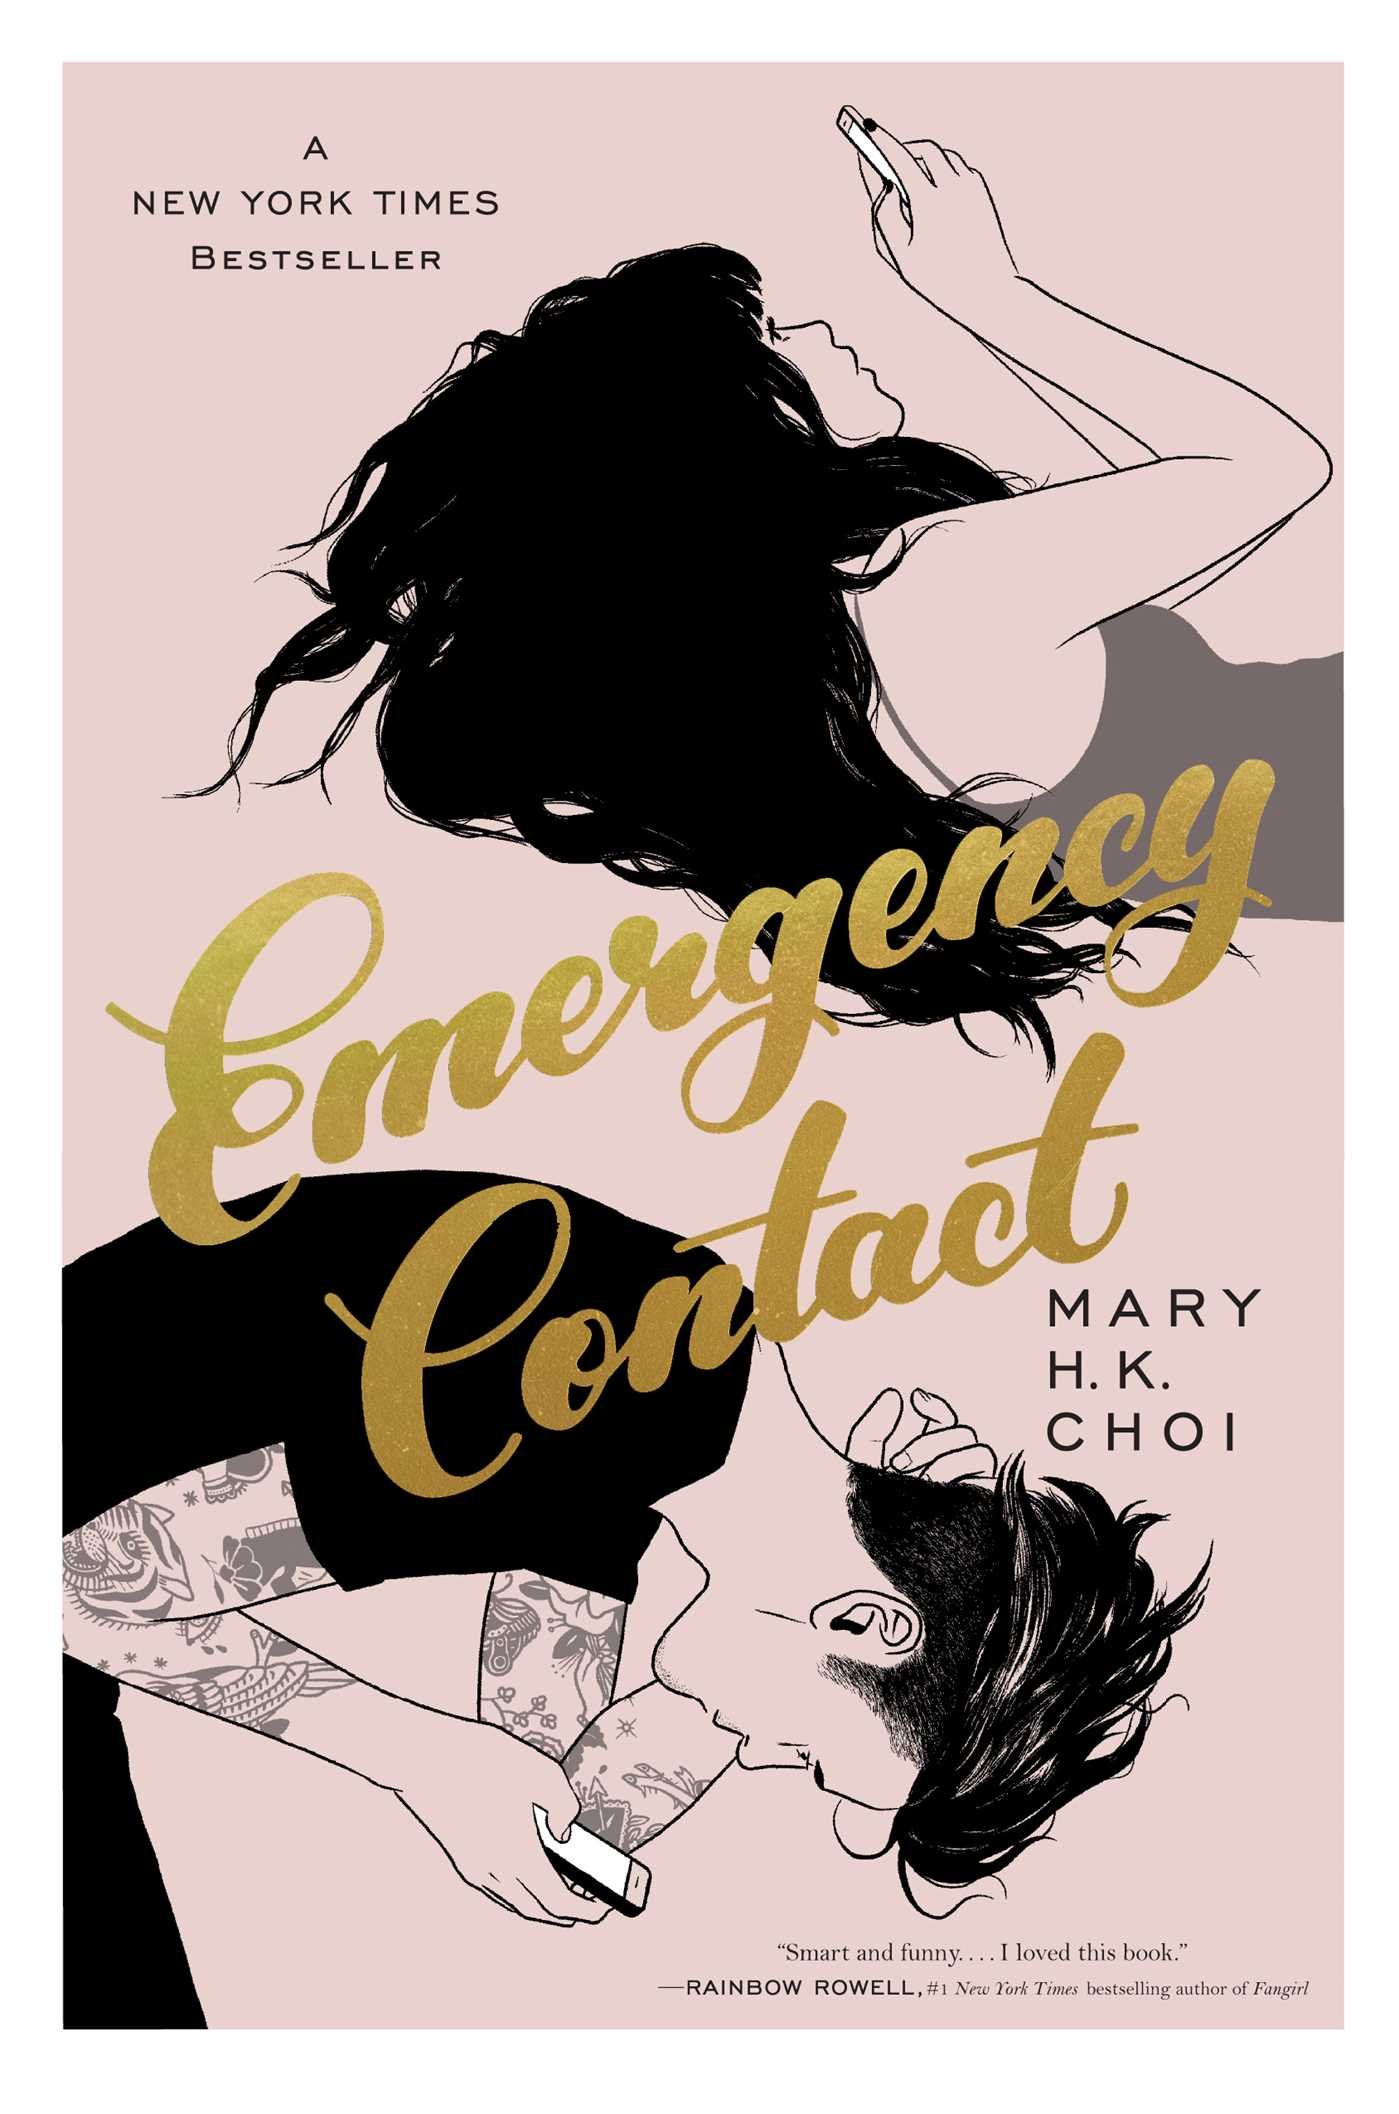 image for "emergency contact"